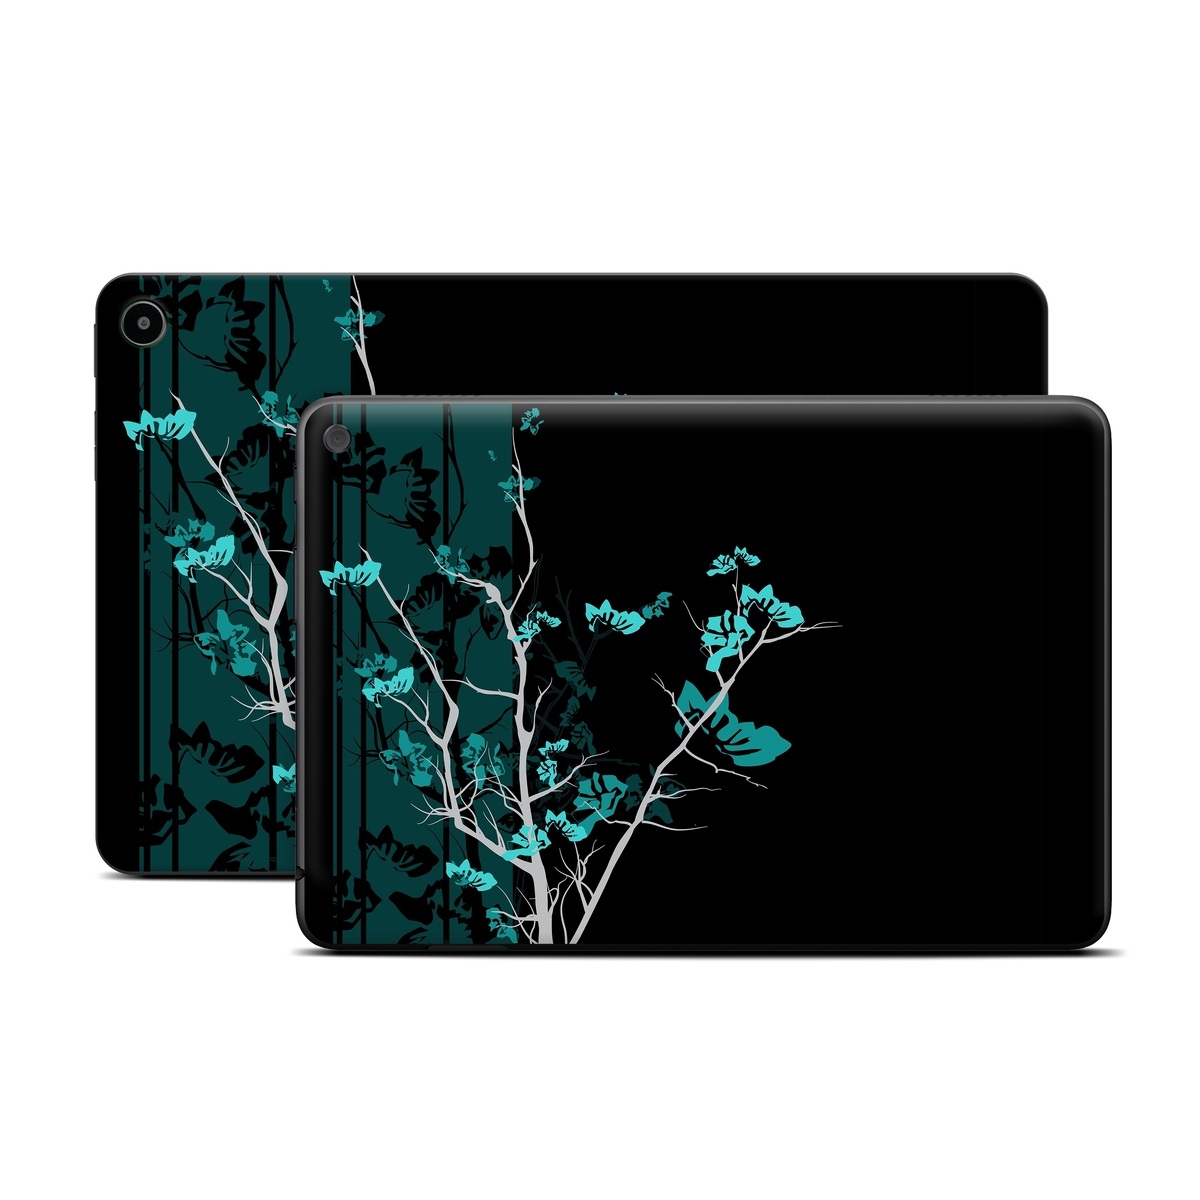 Amazon Fire Tablet Series Skin Skin design of Branch, Black, Blue, Green, Turquoise, Teal, Tree, Plant, Graphic design, Twig, with black, blue, gray colors